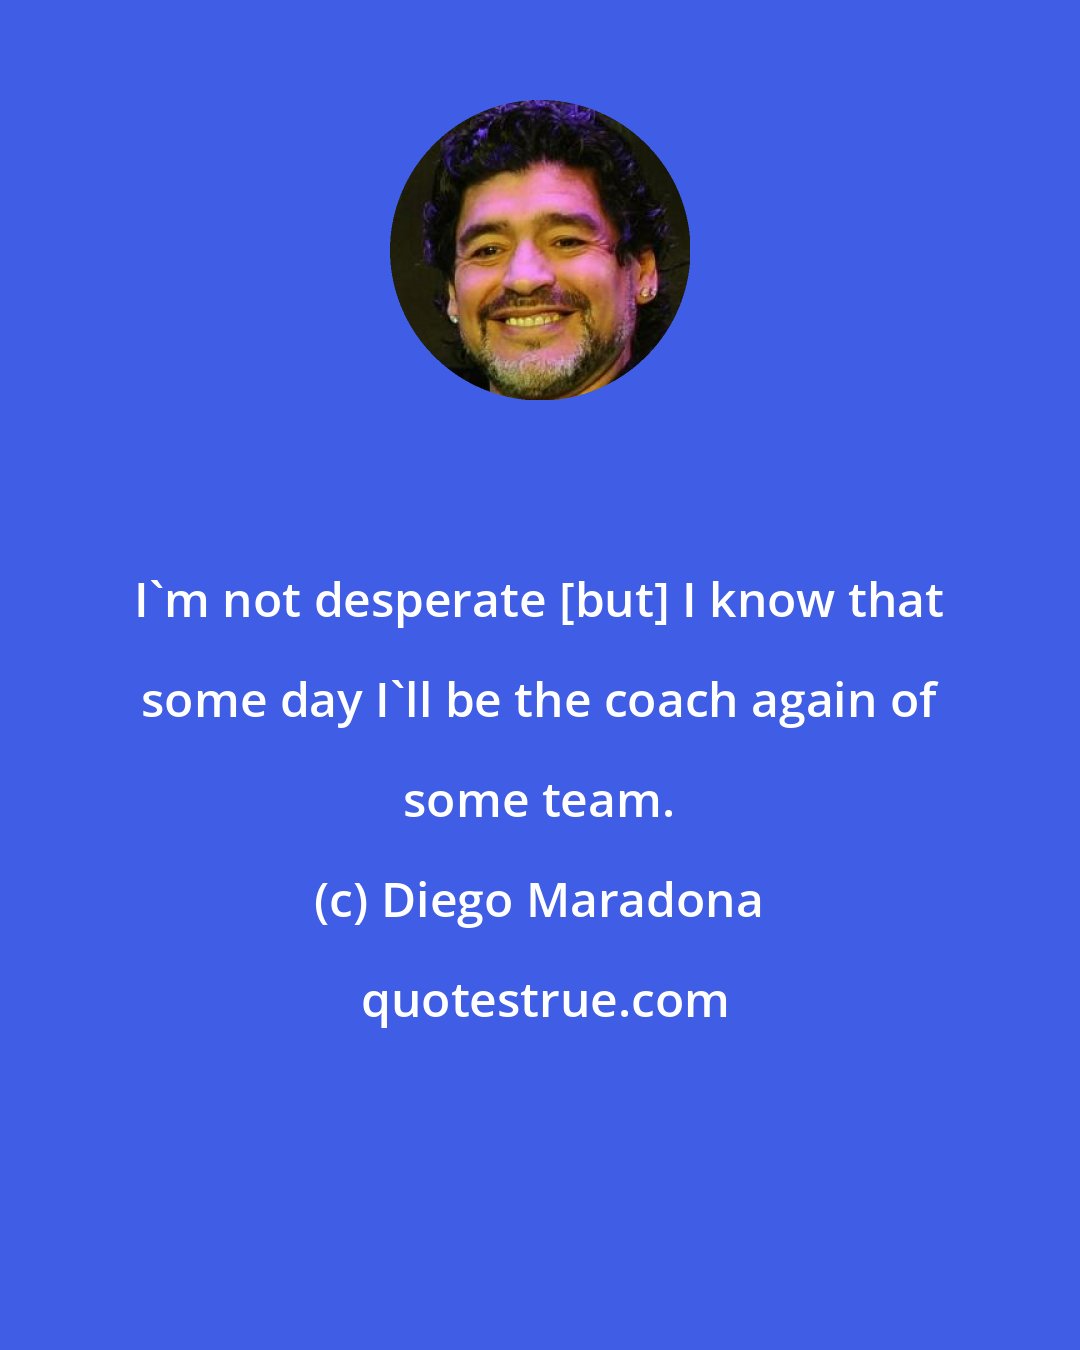 Diego Maradona: I'm not desperate [but] I know that some day I'll be the coach again of some team.